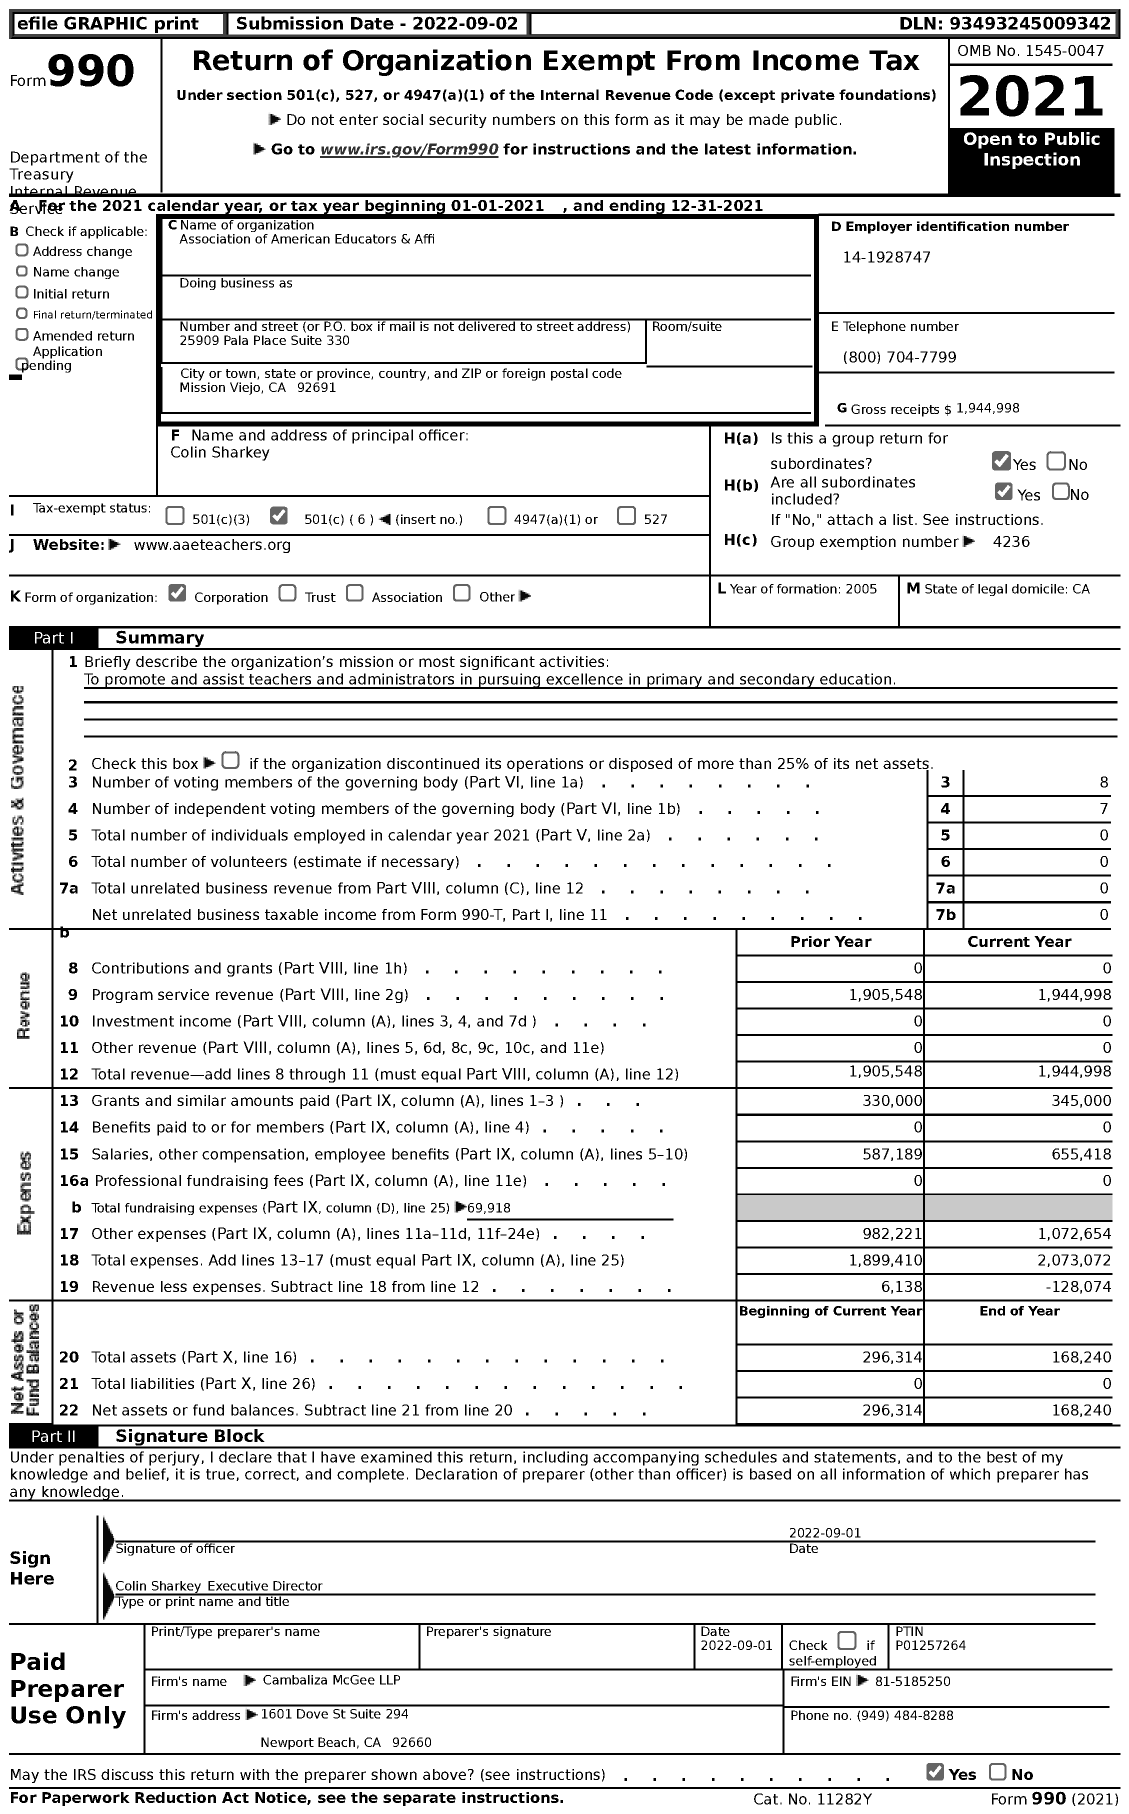 Image of first page of 2021 Form 990 for Association of American Educators & Affiliates (AAE)